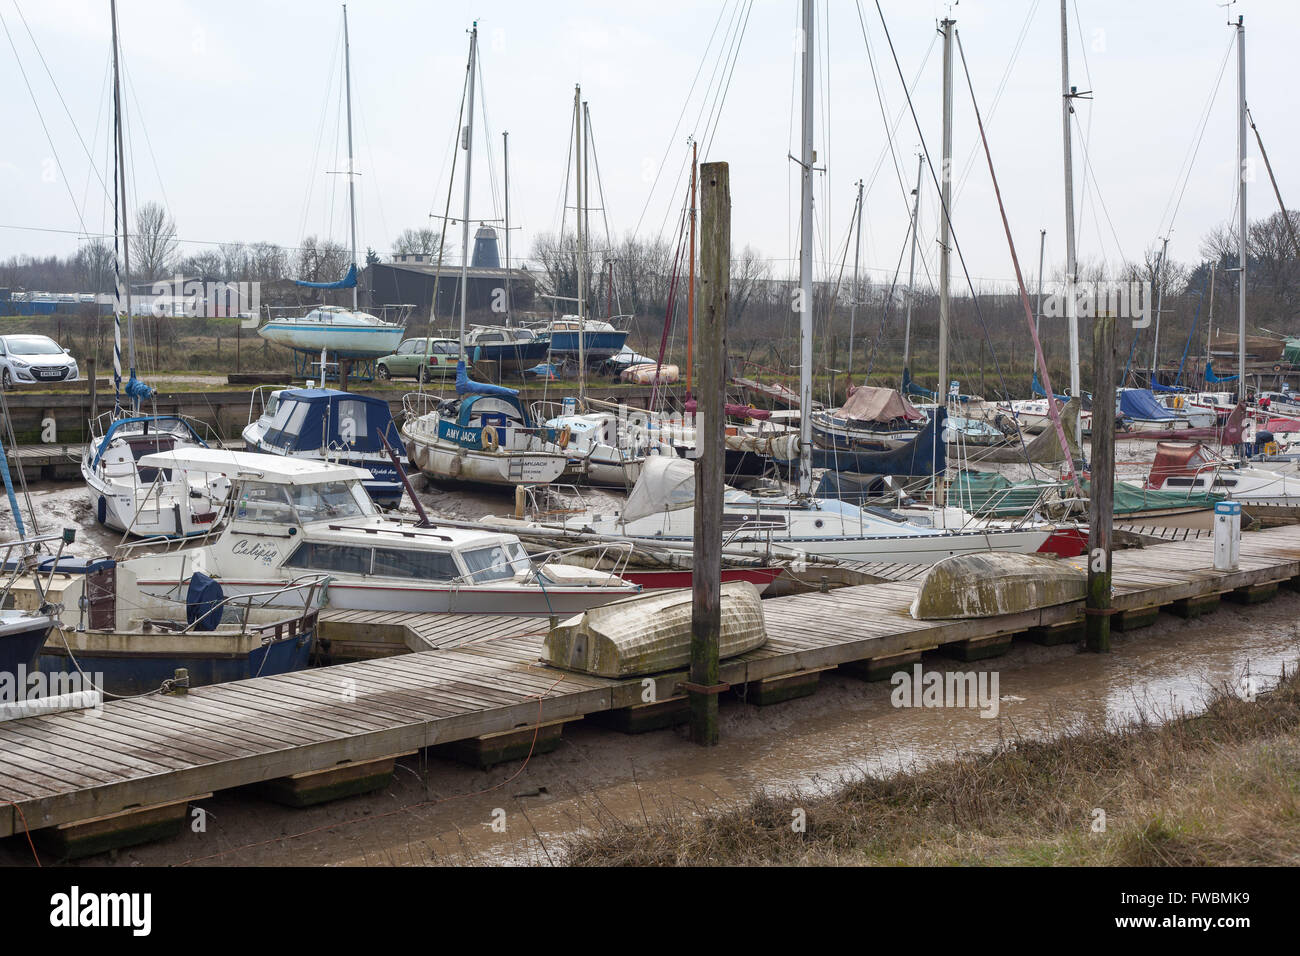 Boast and yachts moored in the Oare Creek, Swale Estuary, Kent, England. Stock Photo